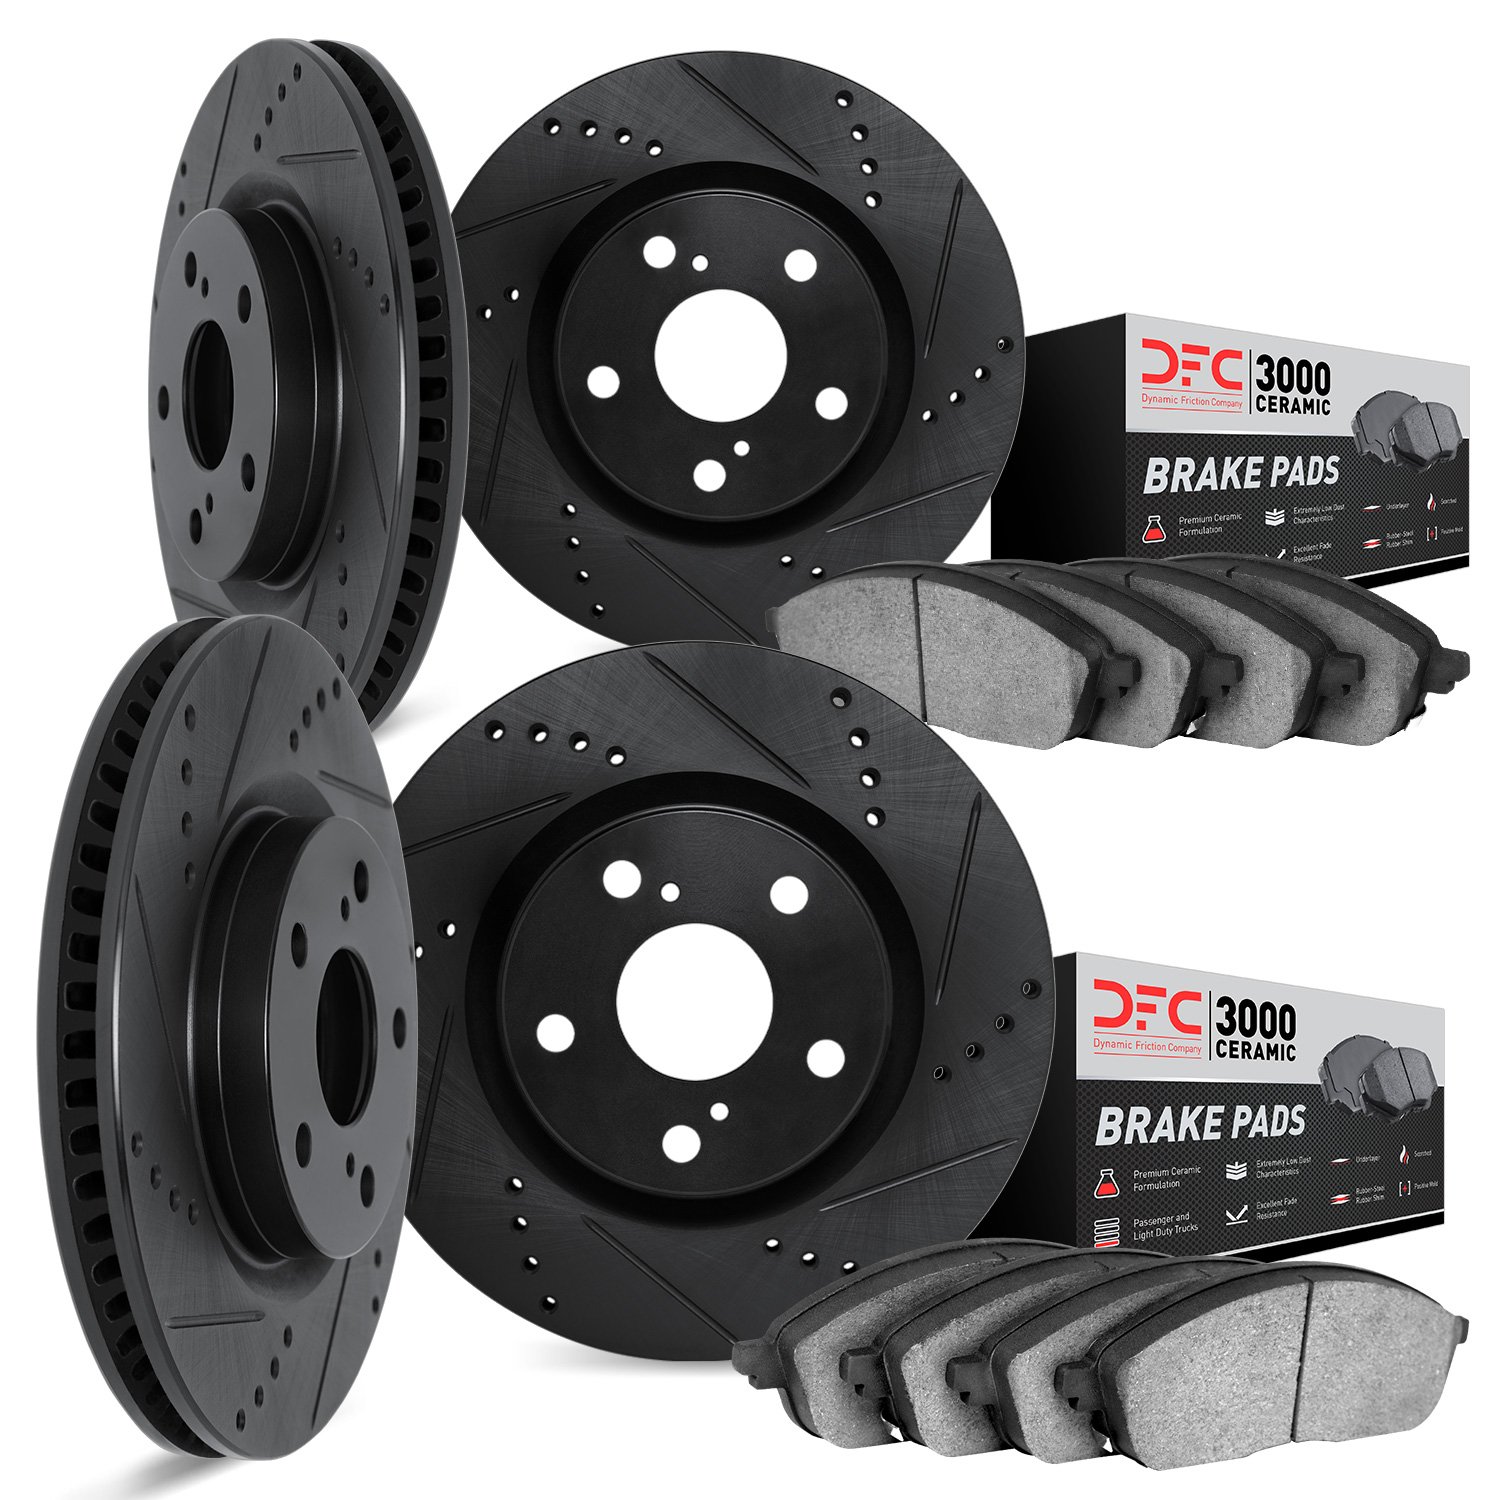 8304-40023 Drilled/Slotted Brake Rotors with 3000-Series Ceramic Brake Pads Kit [Black], 2002-2006 Mopar, Position: Front and Re